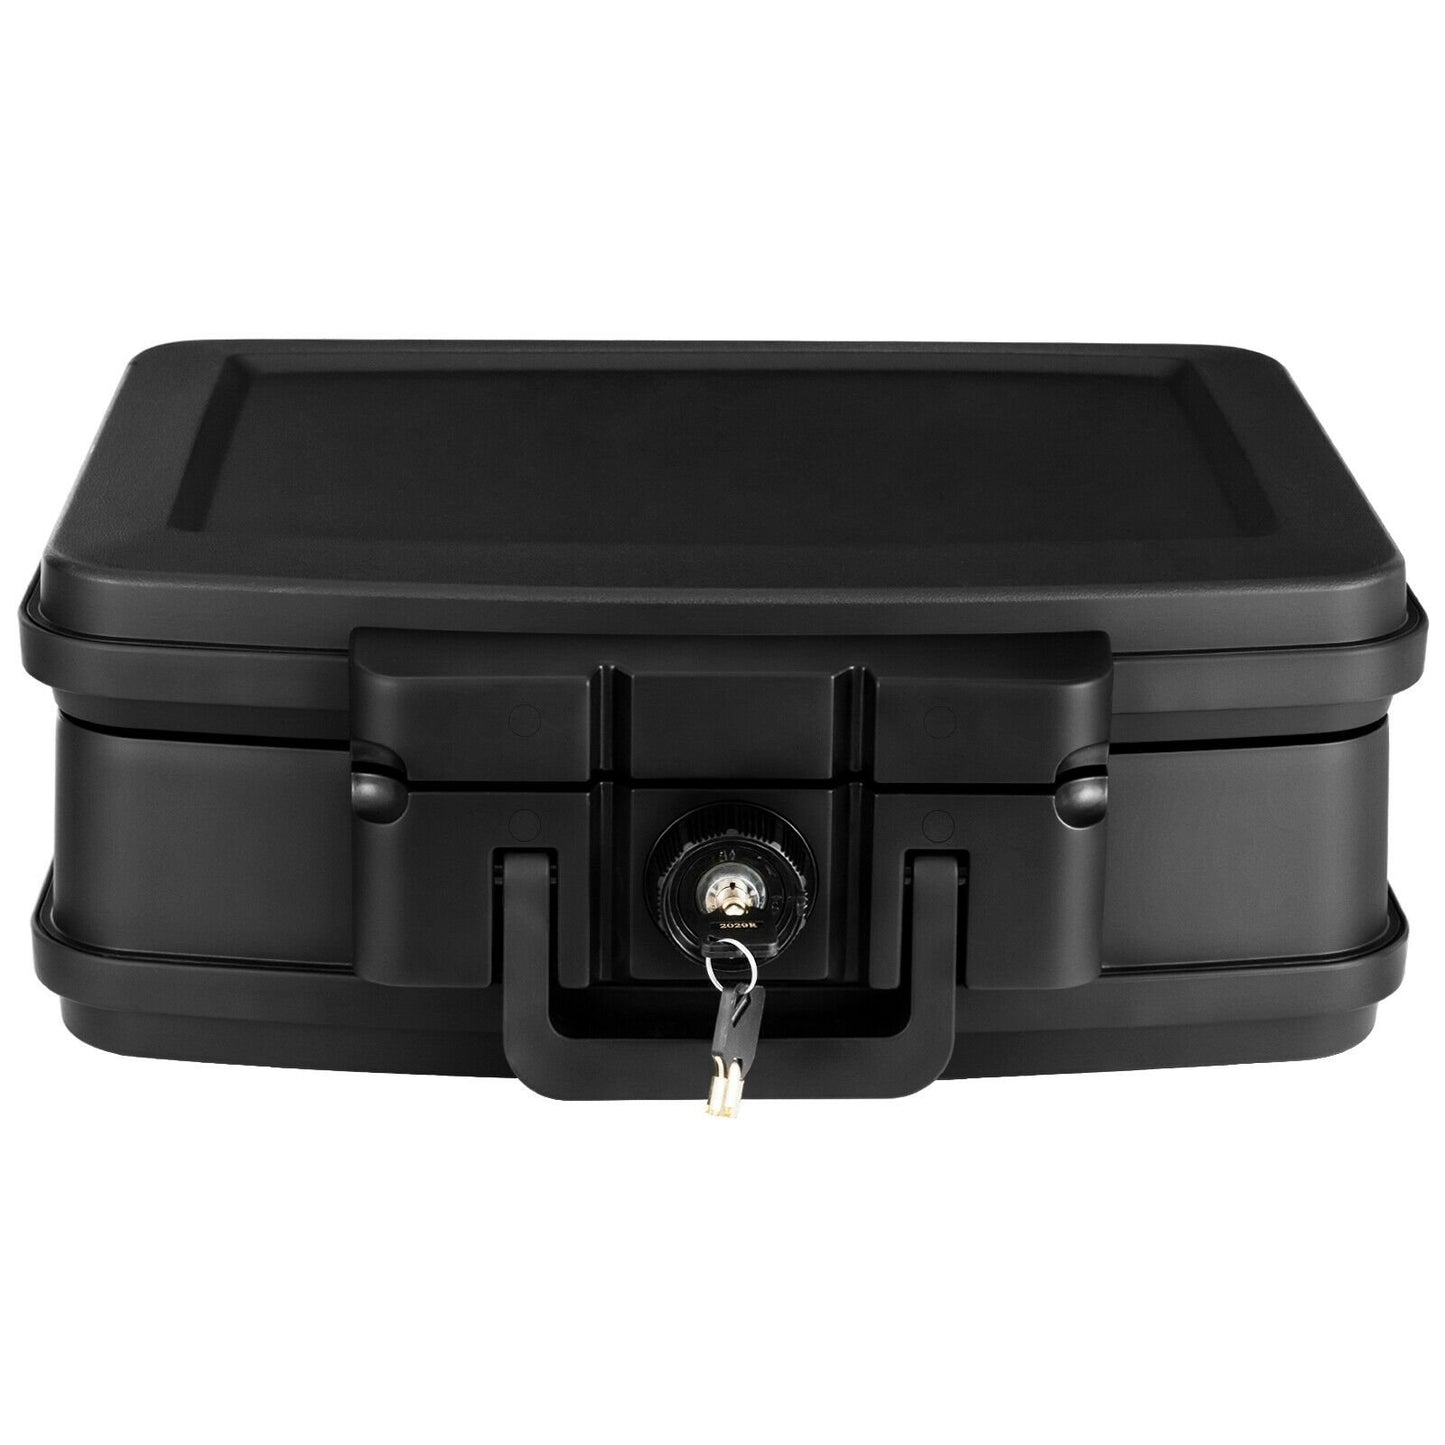 Fireproof Waterproof 30 Minute Safe Box with Lock and Handle-18 x 15 x 7 inches, Black - Gallery Canada